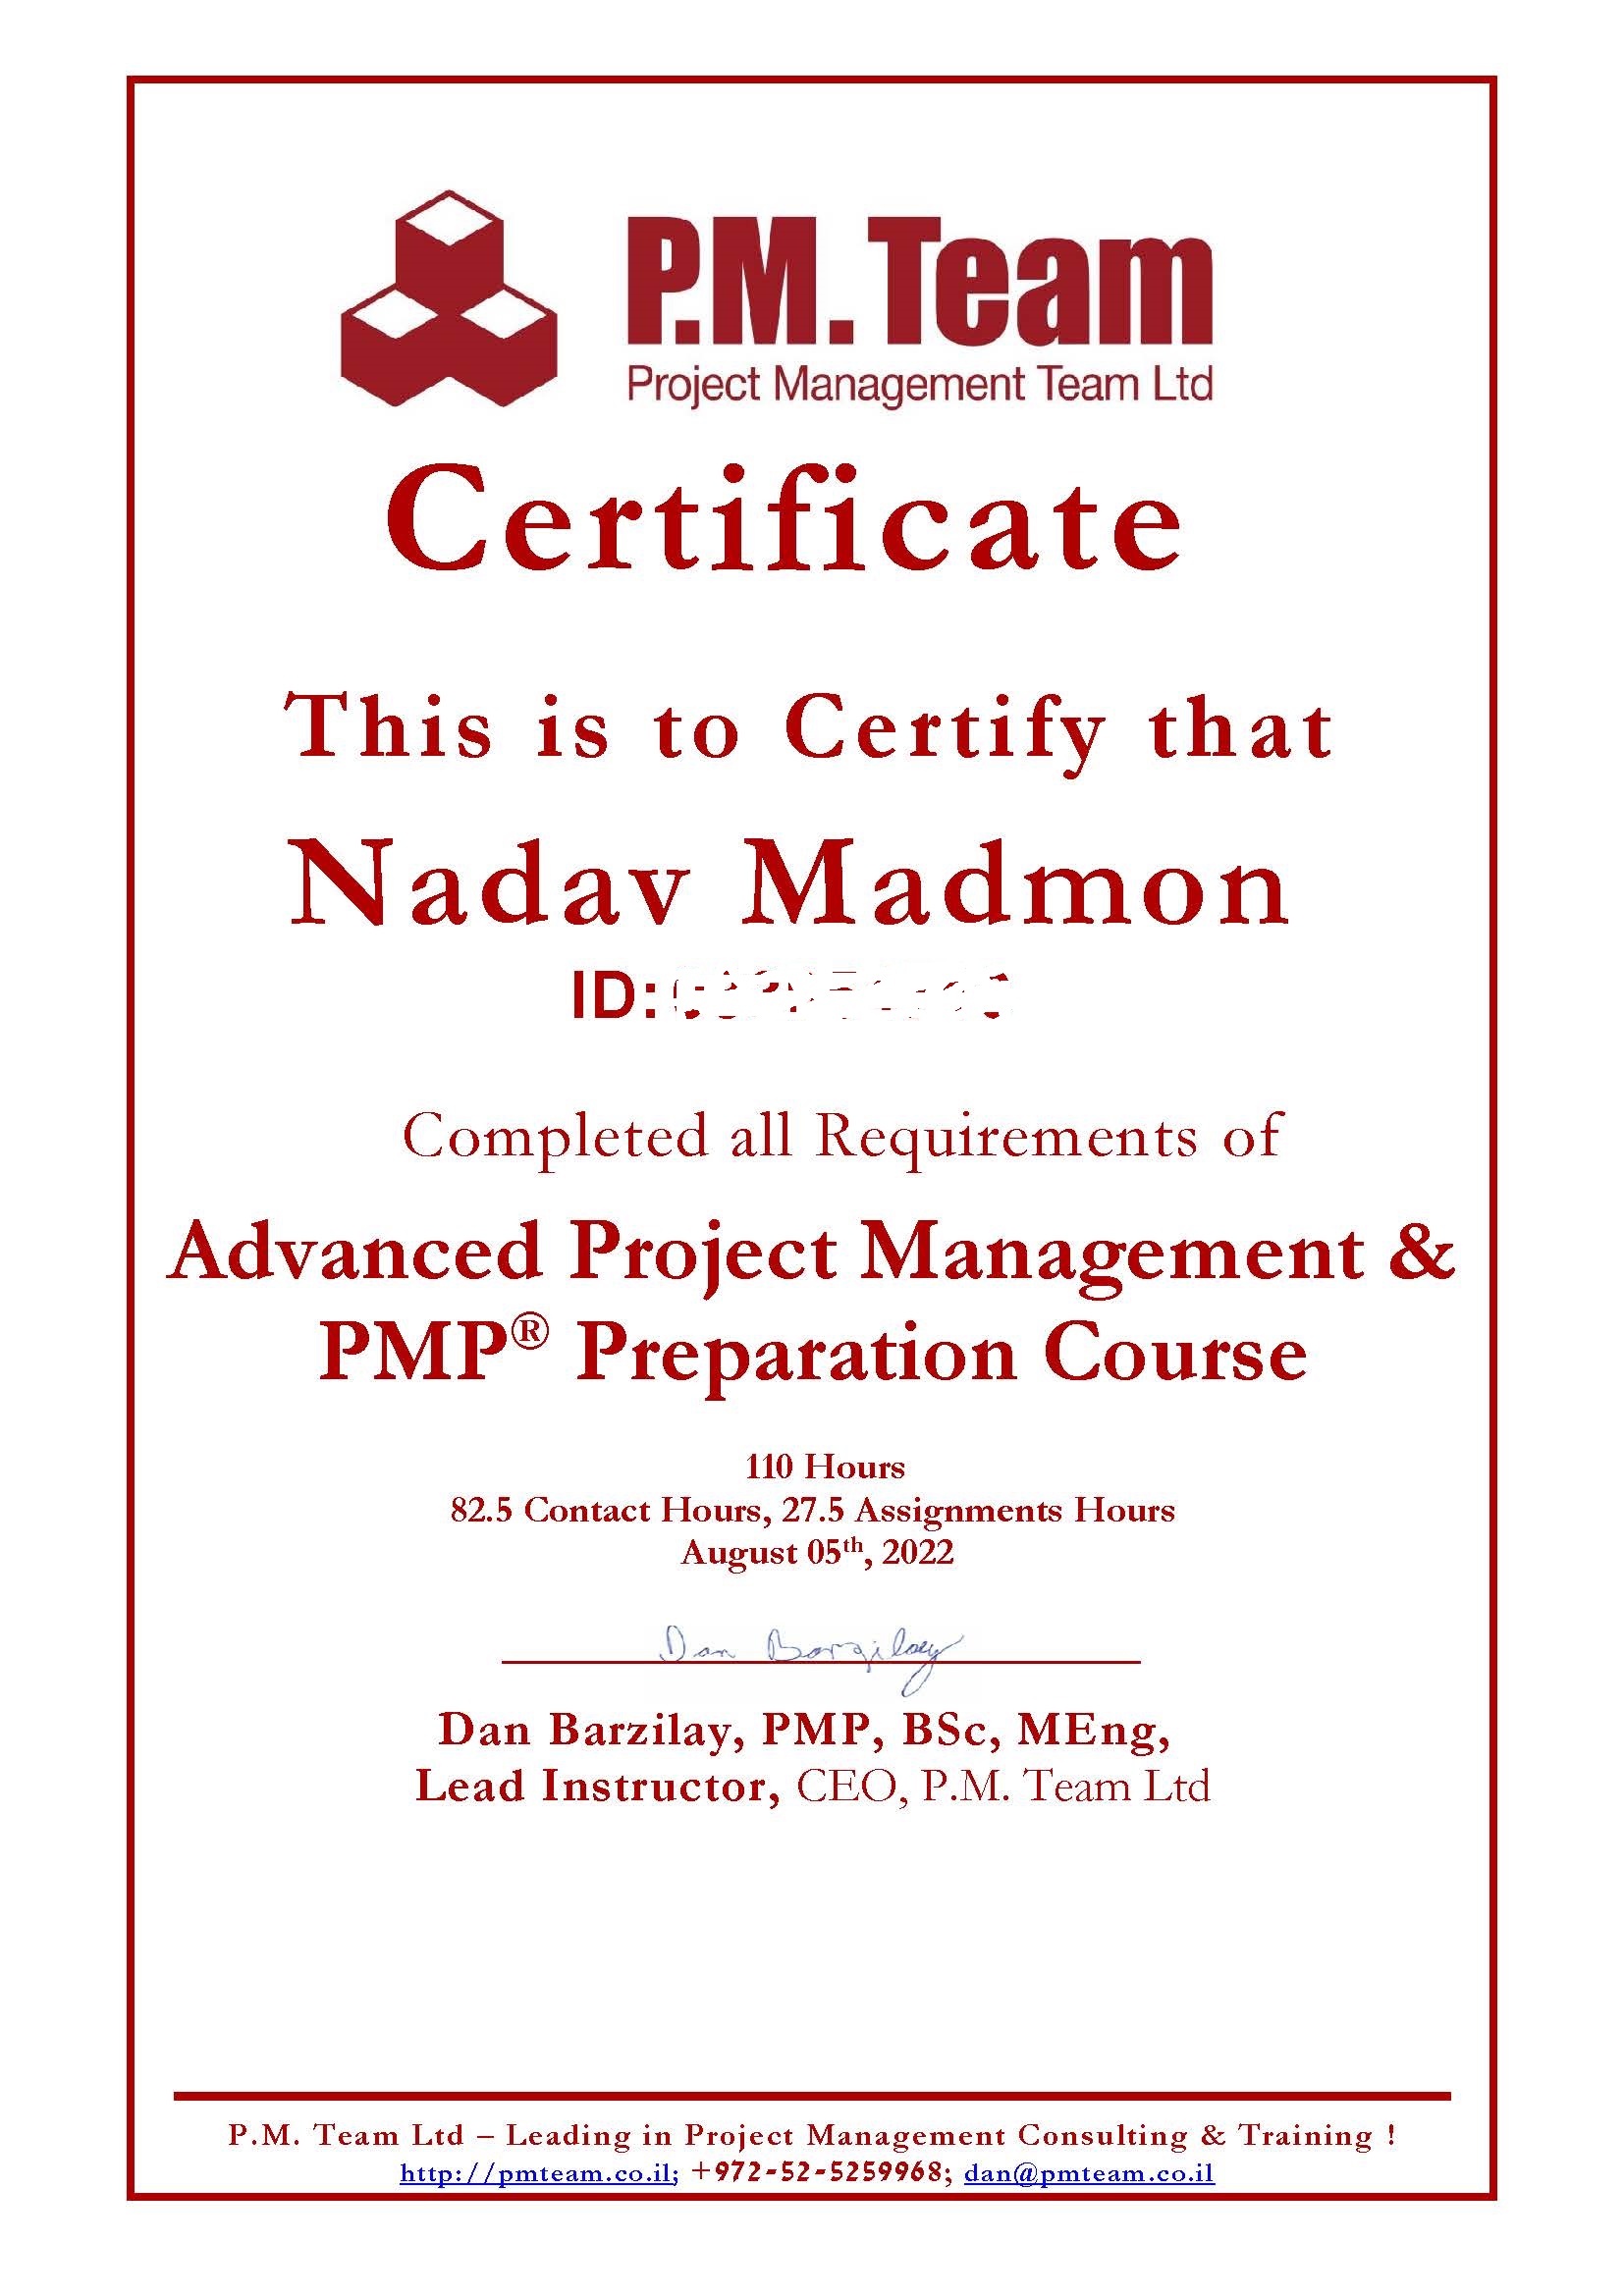 Nadav Madmon Project Management Course Certificate